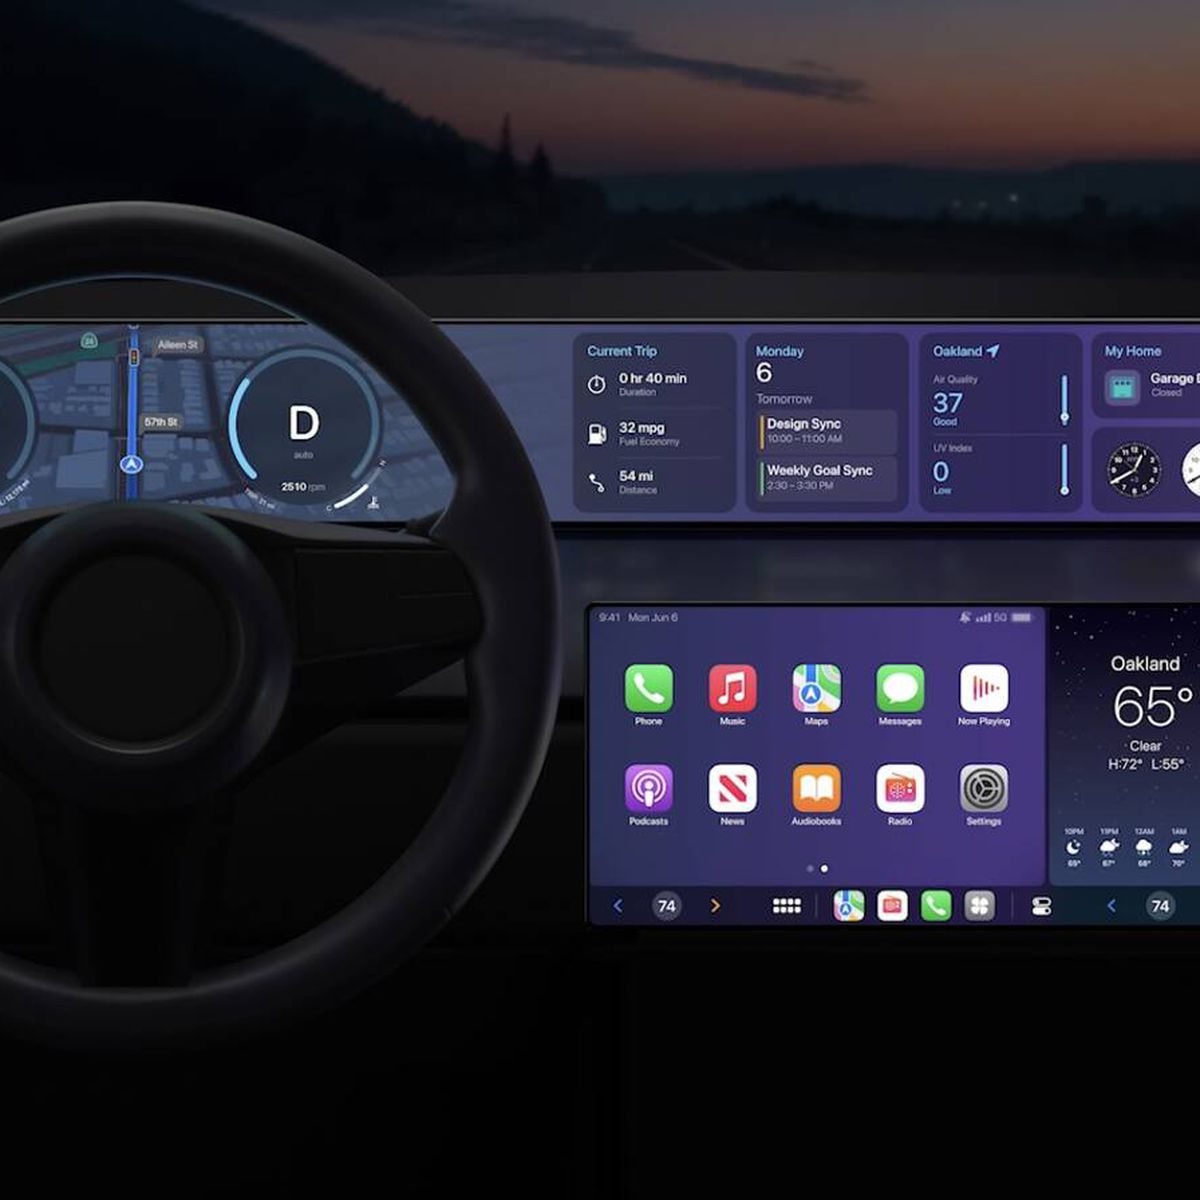 All-New Apple CarPlay Launching This Year Starting With These 14 Car Brands  - MacRumors